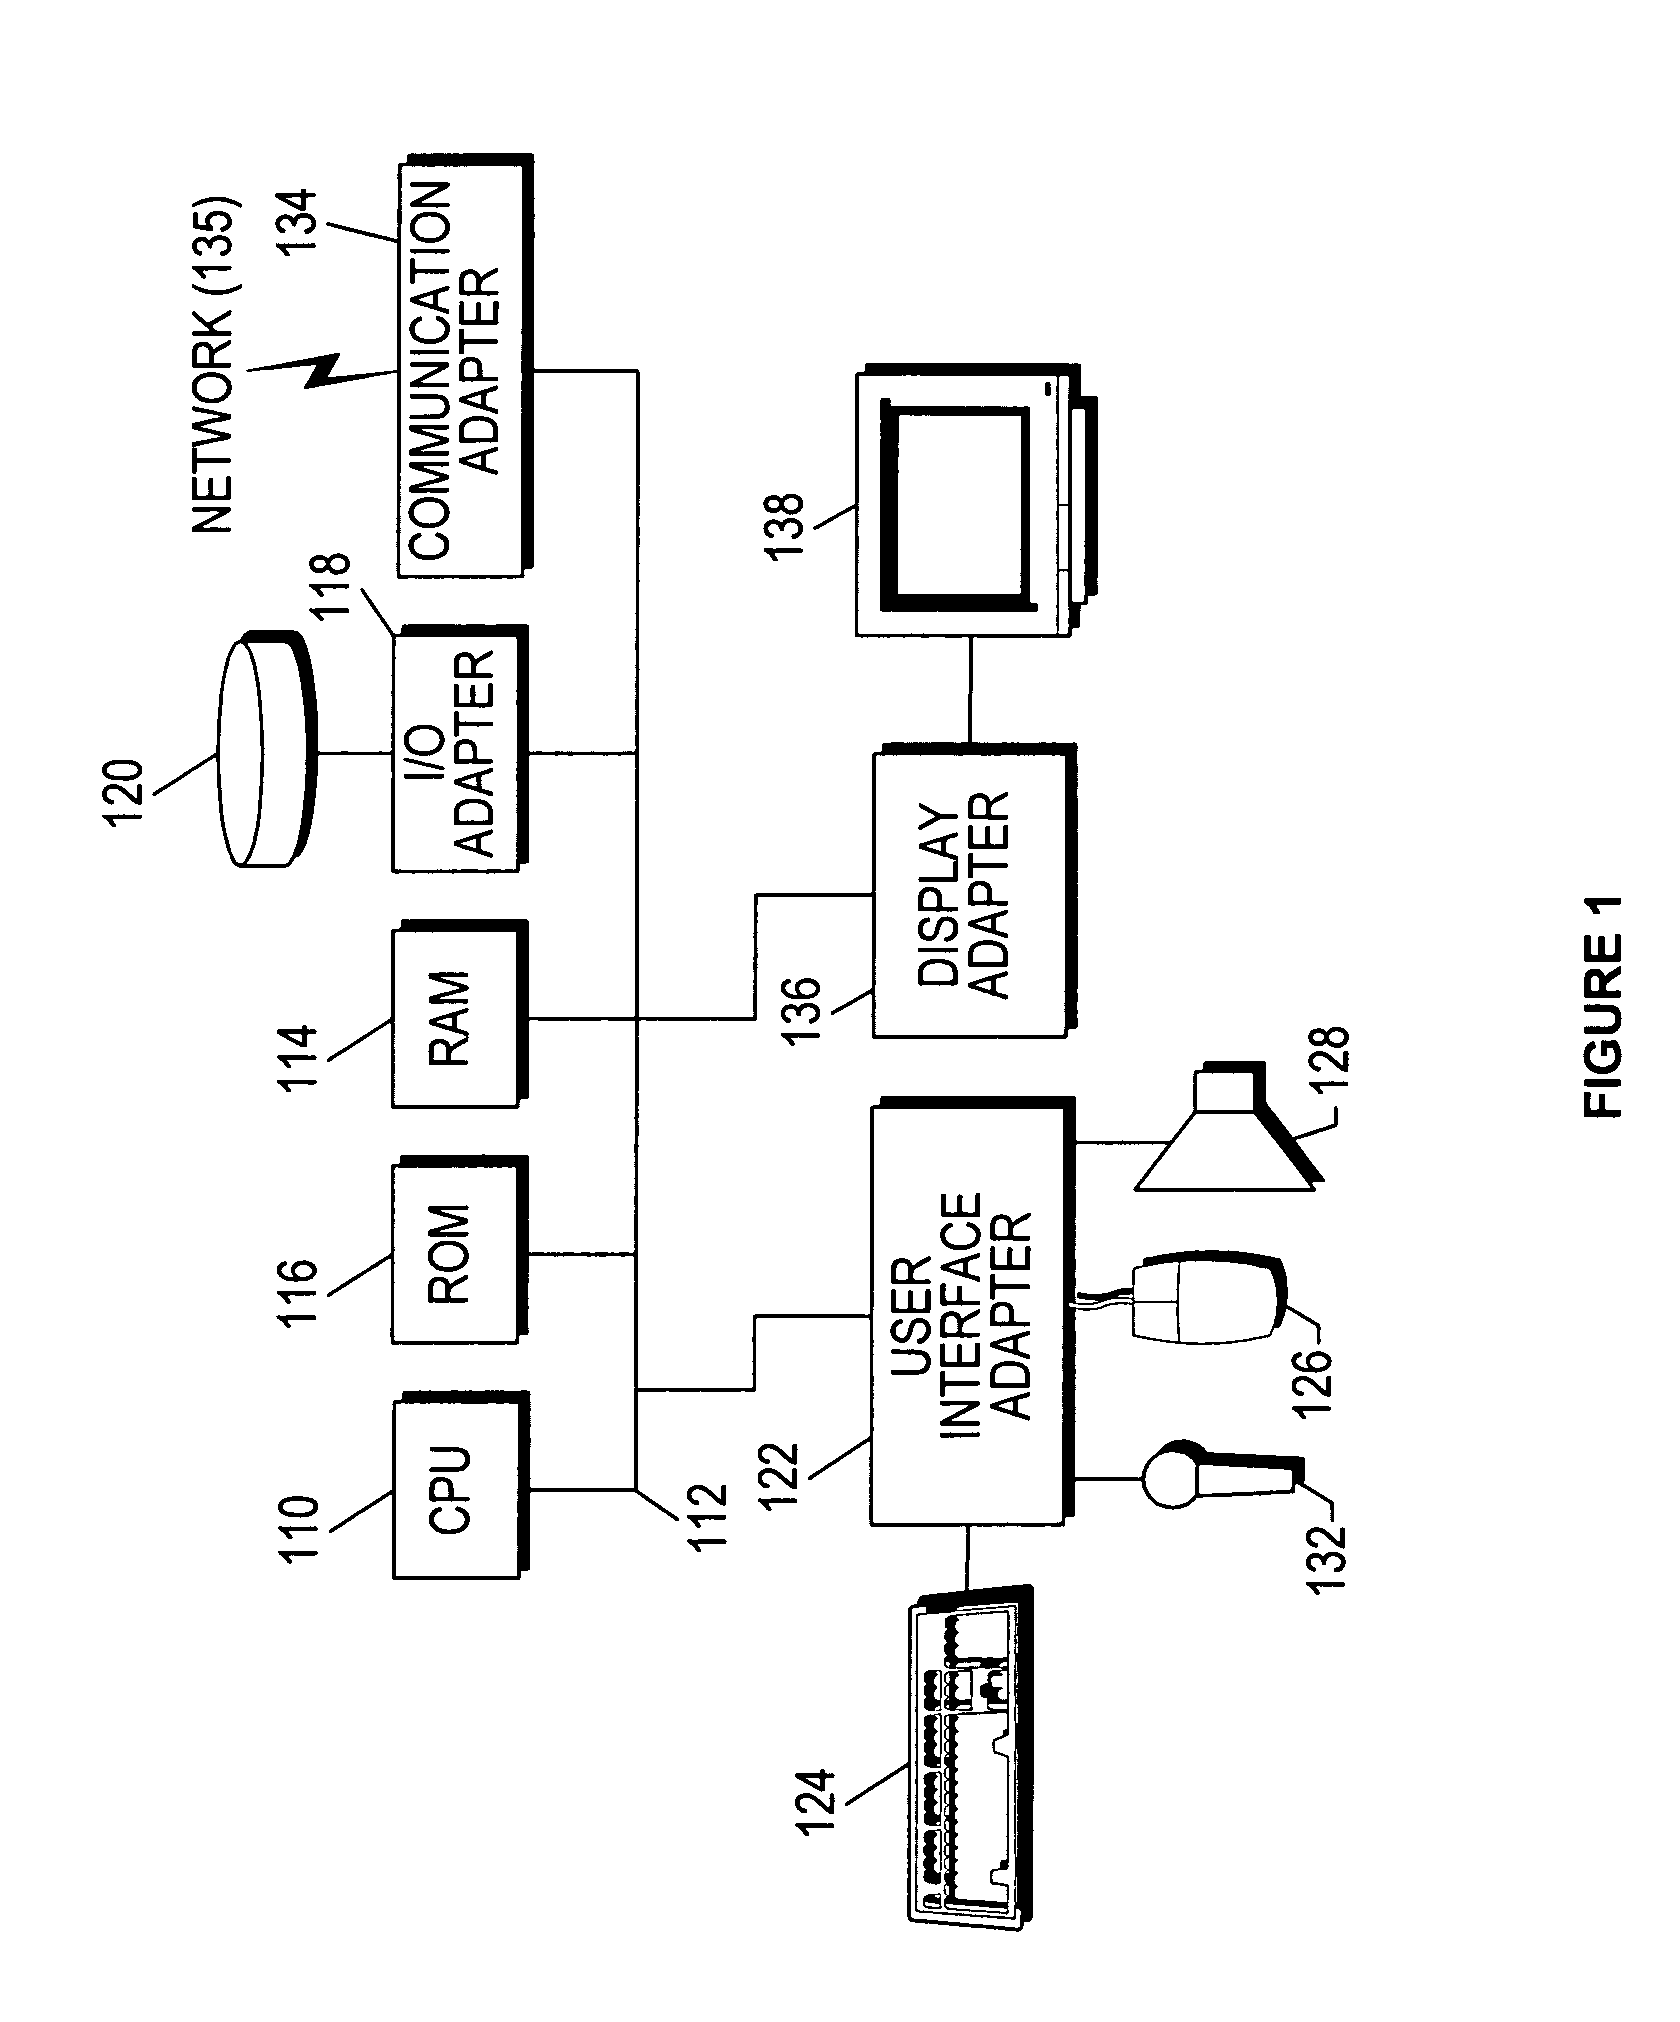 System, method and computer program product for selecting virus detection actions based on a process by which files are being accessed